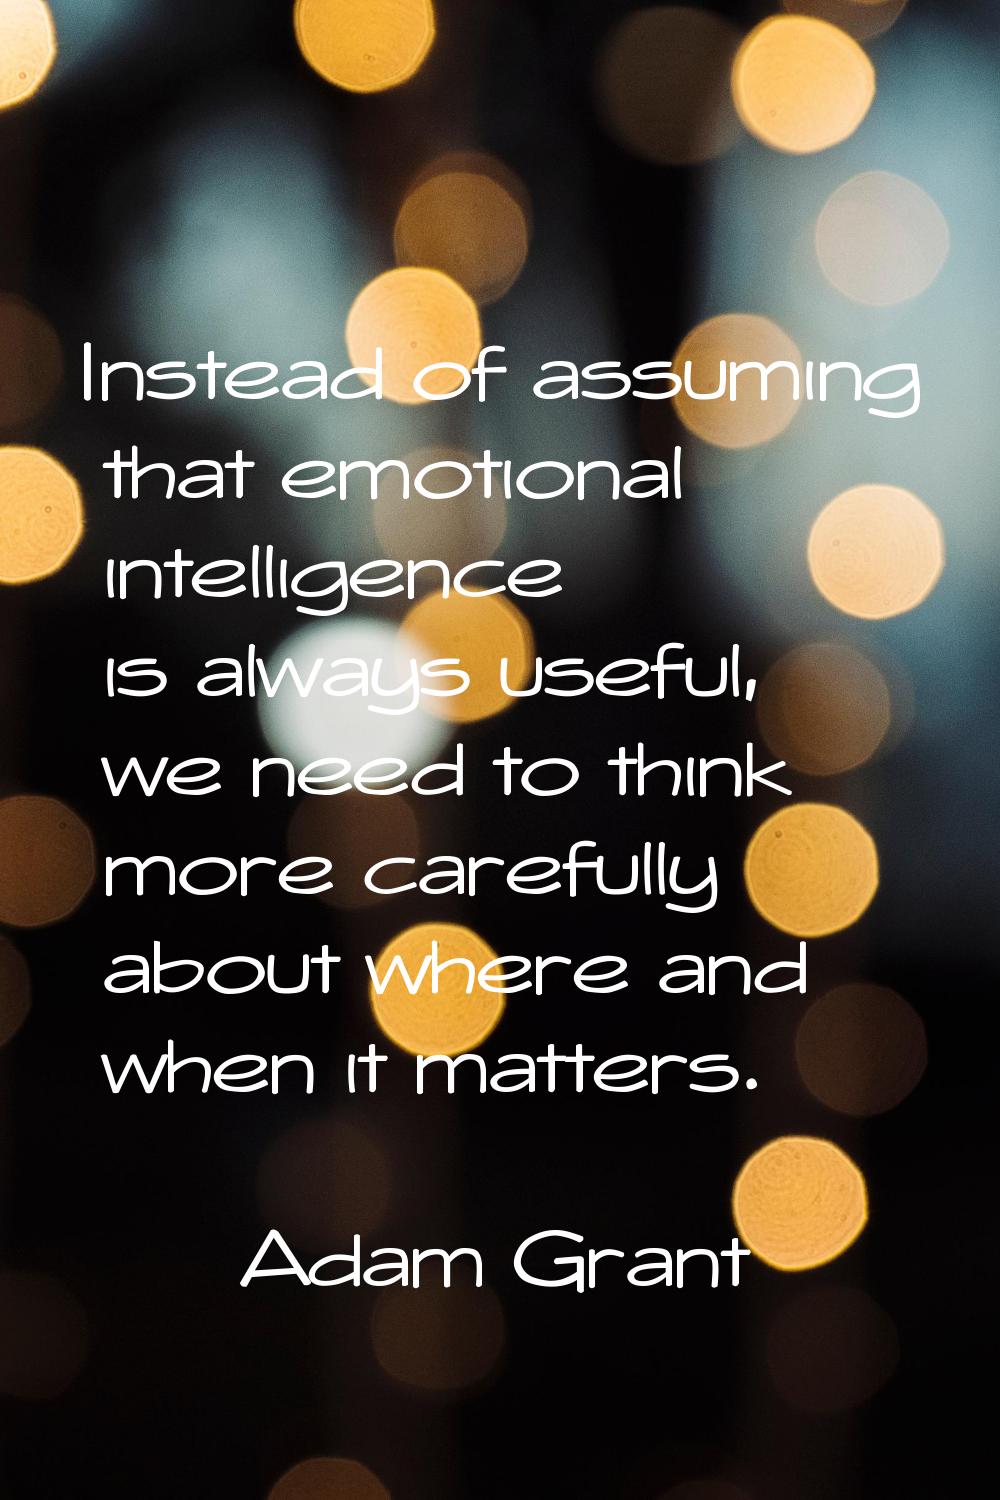 Instead of assuming that emotional intelligence is always useful, we need to think more carefully a